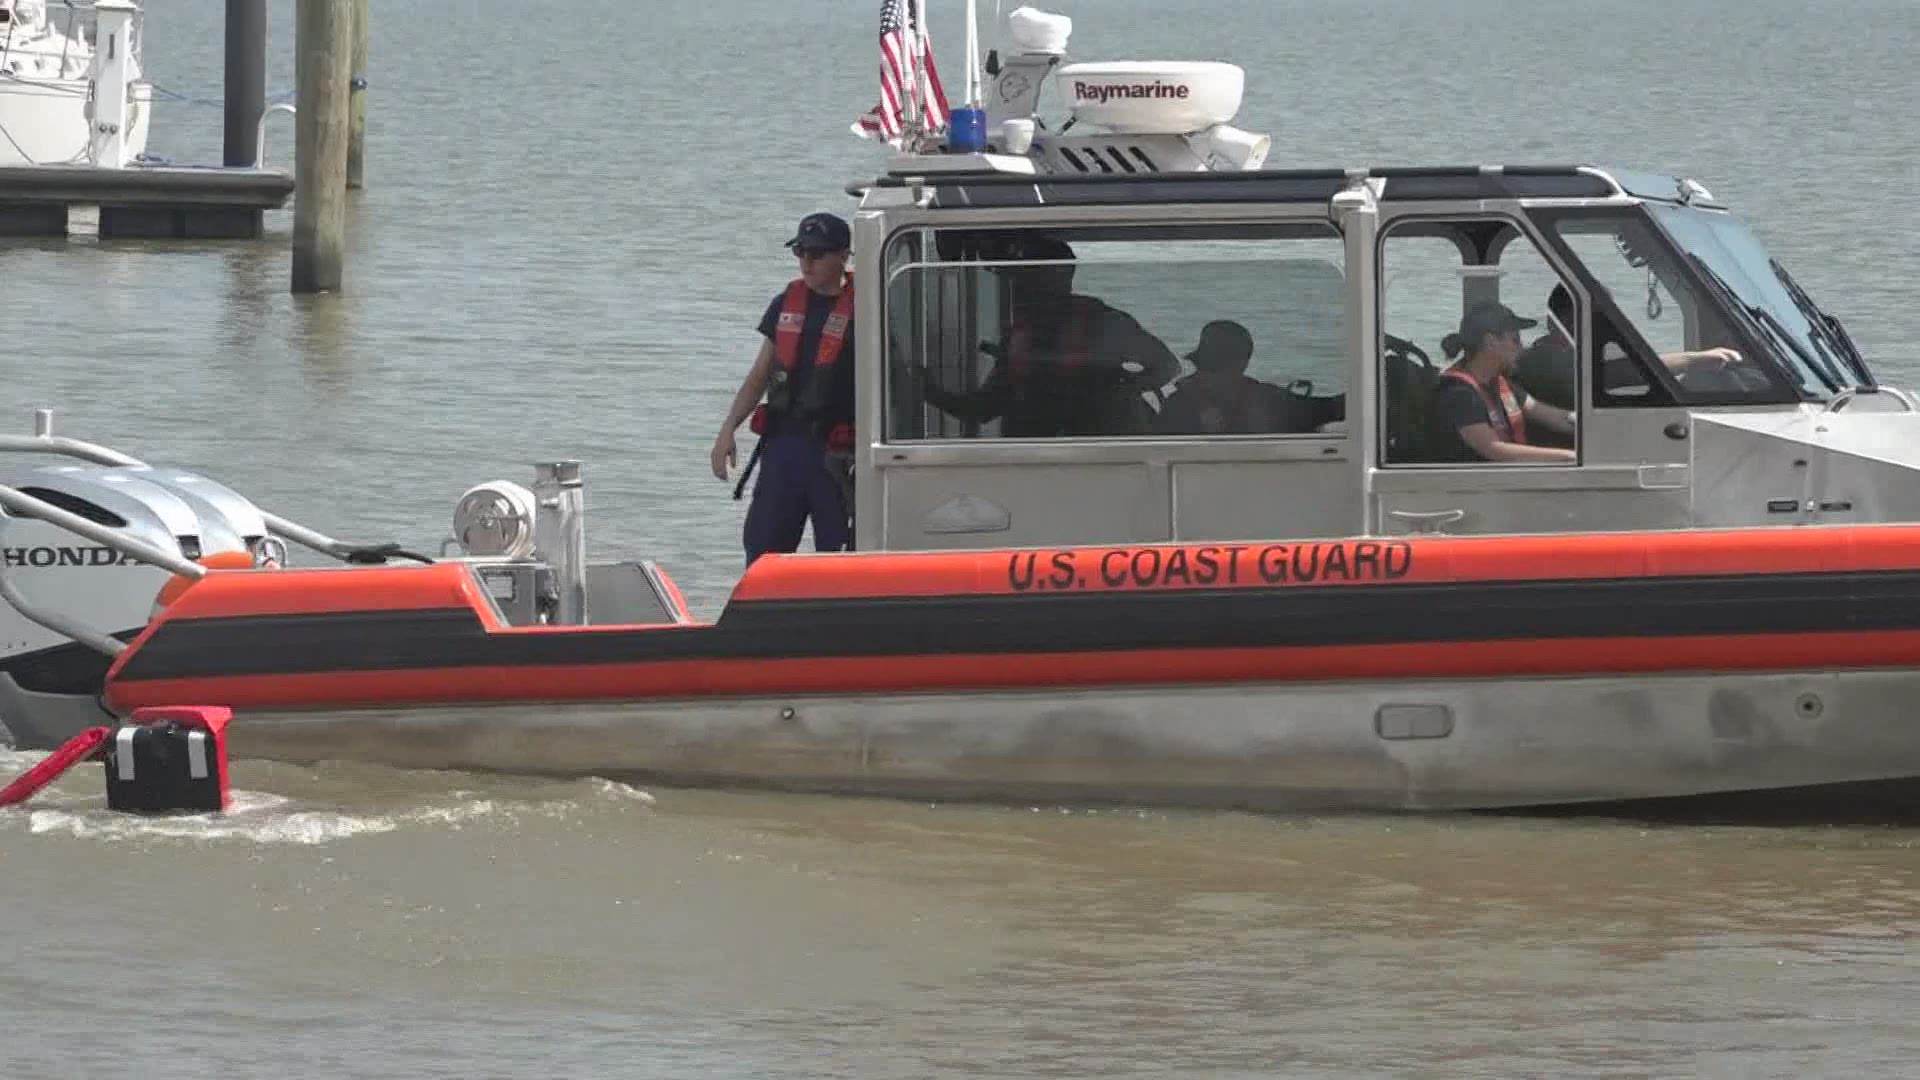 It's National Safe Boating Week and in Louisiana so far this year, 9 people have lost their lives.